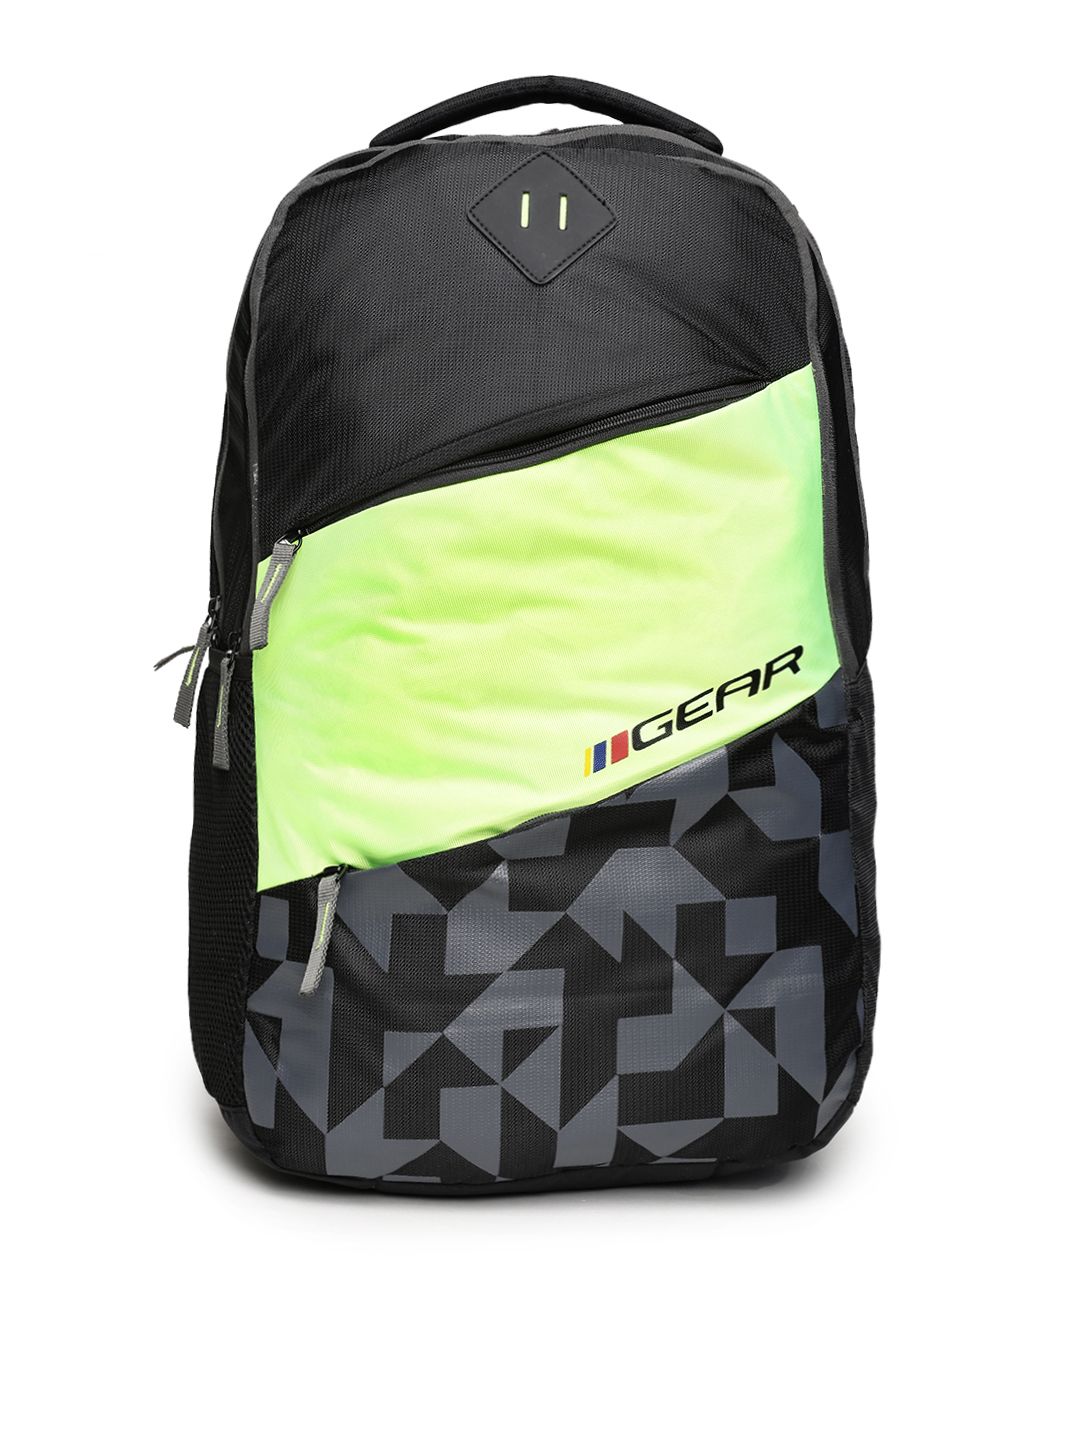 Gear Unisex Black & Lime Green Colourblocked Backpack Price in India